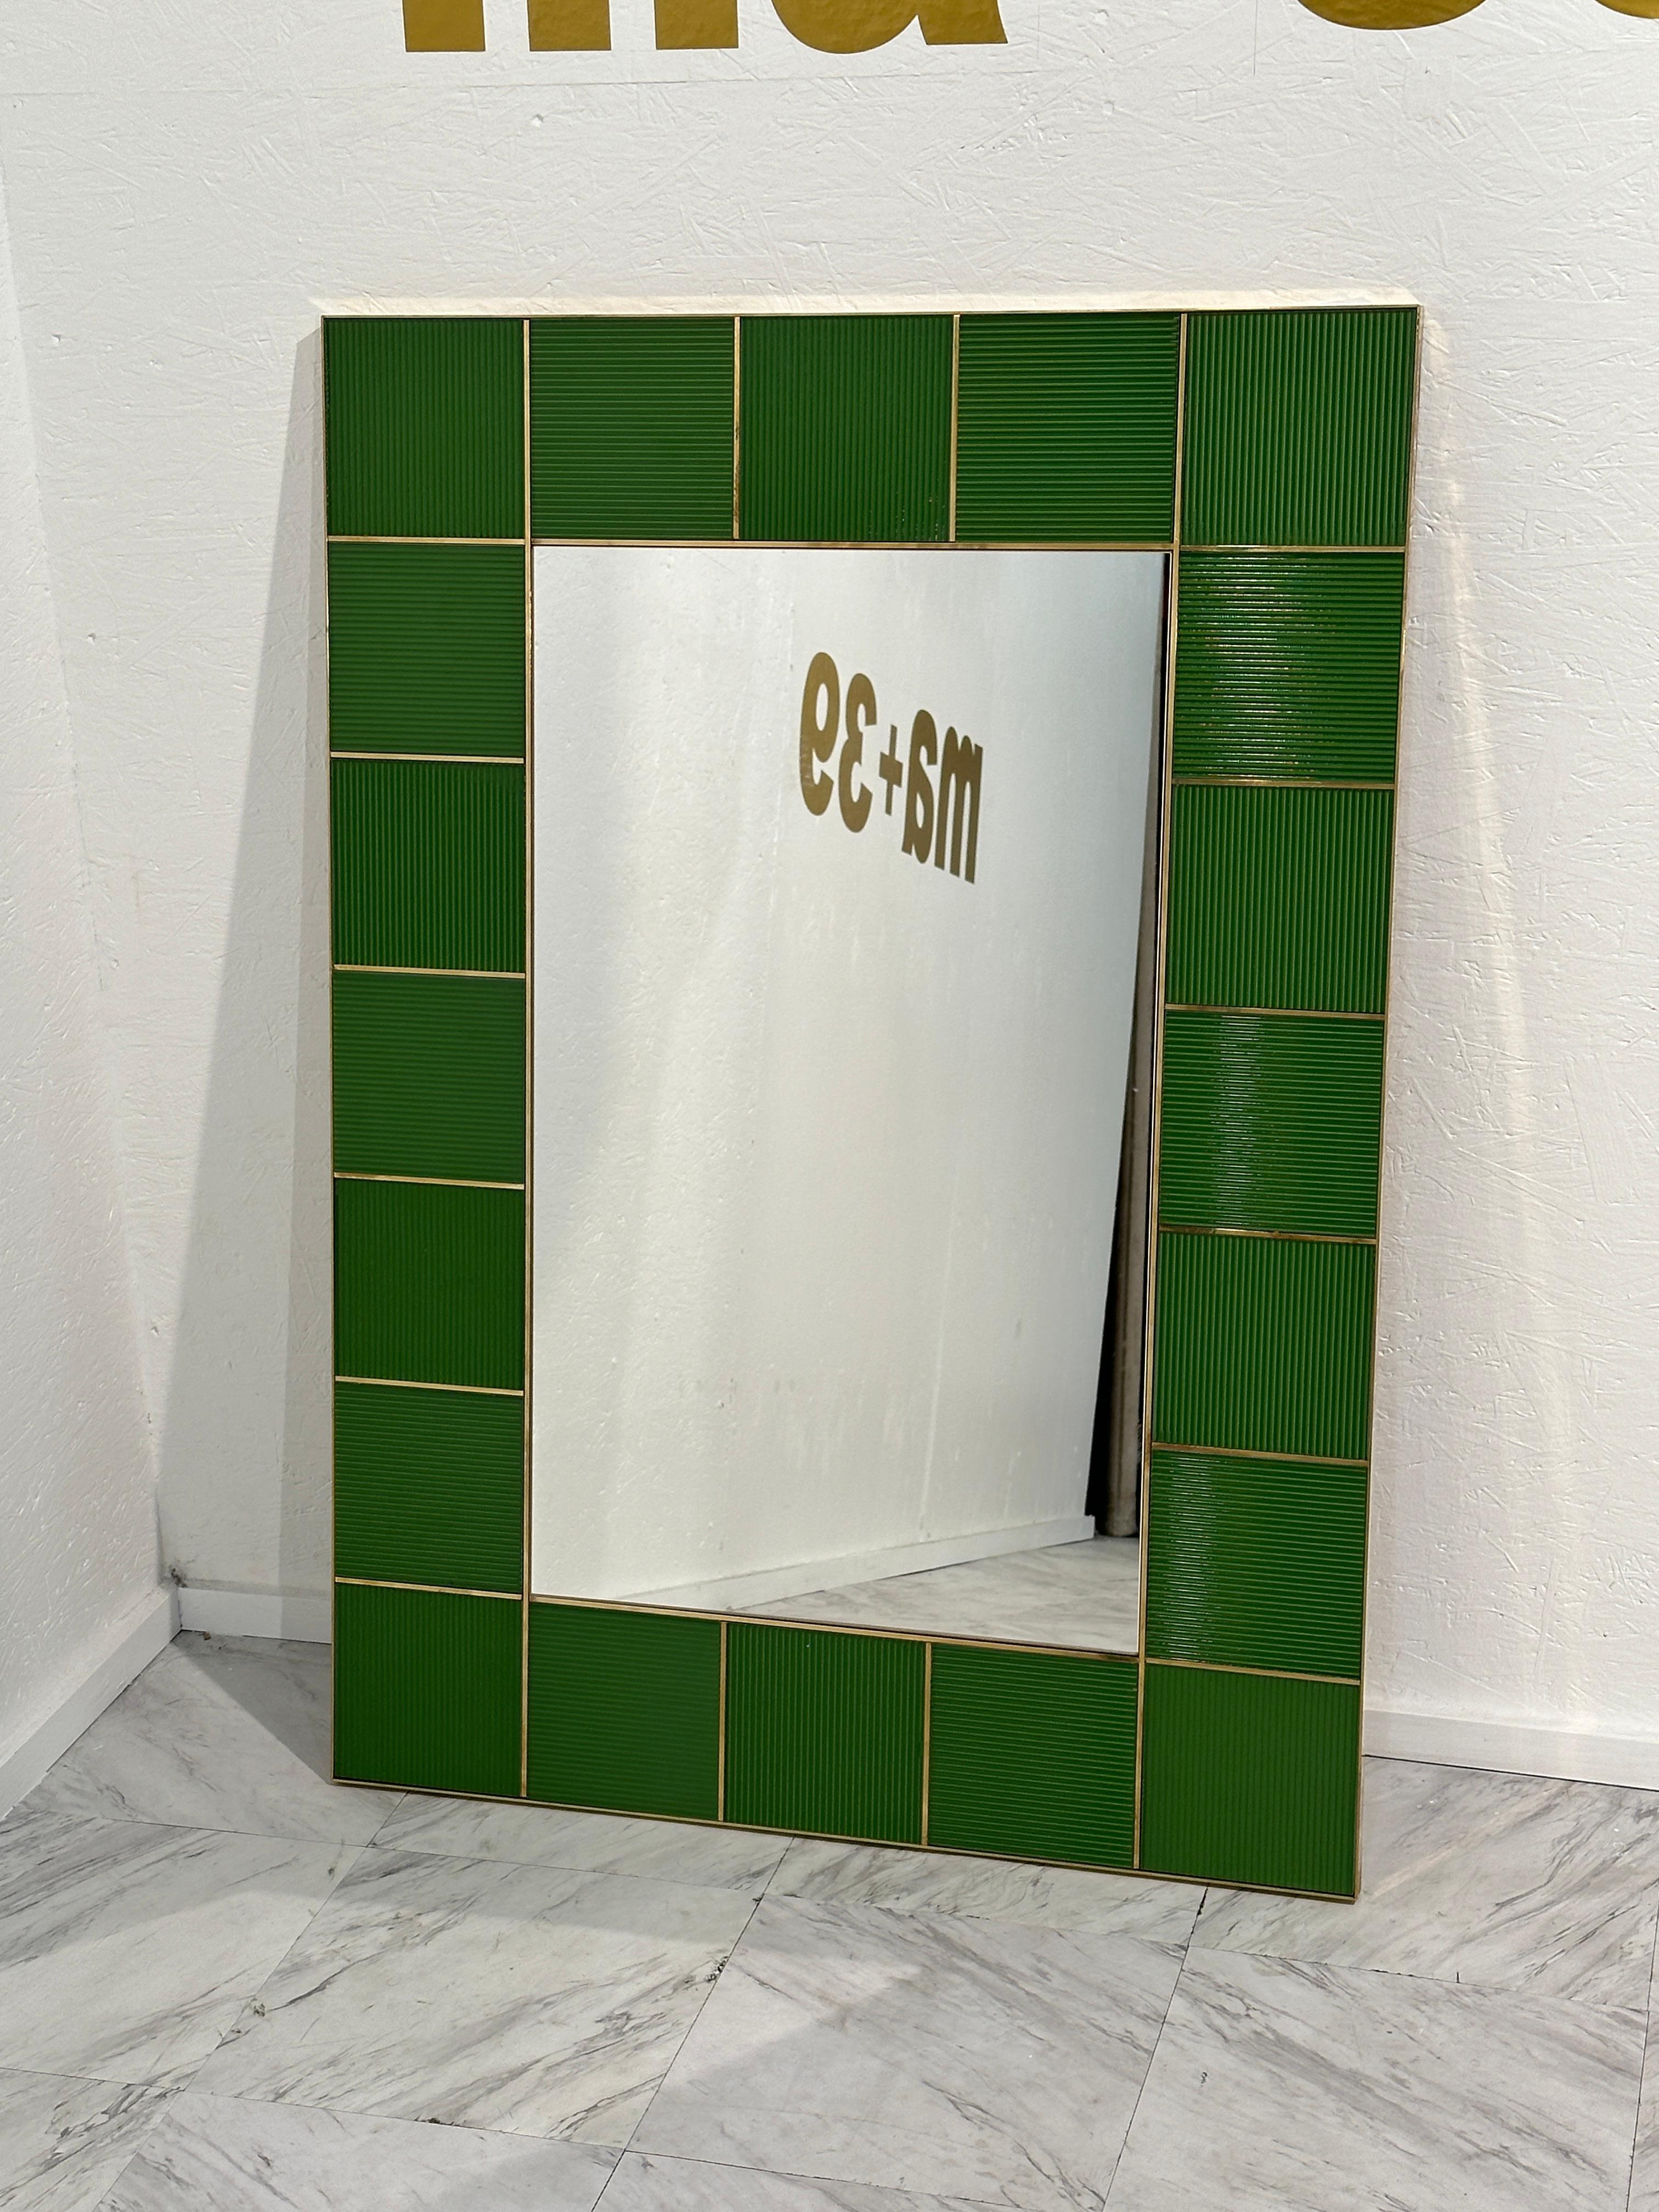 Late 20th Century Vintage Italian Rectangular Wall Mirror With Green Frame 1980s For Sale